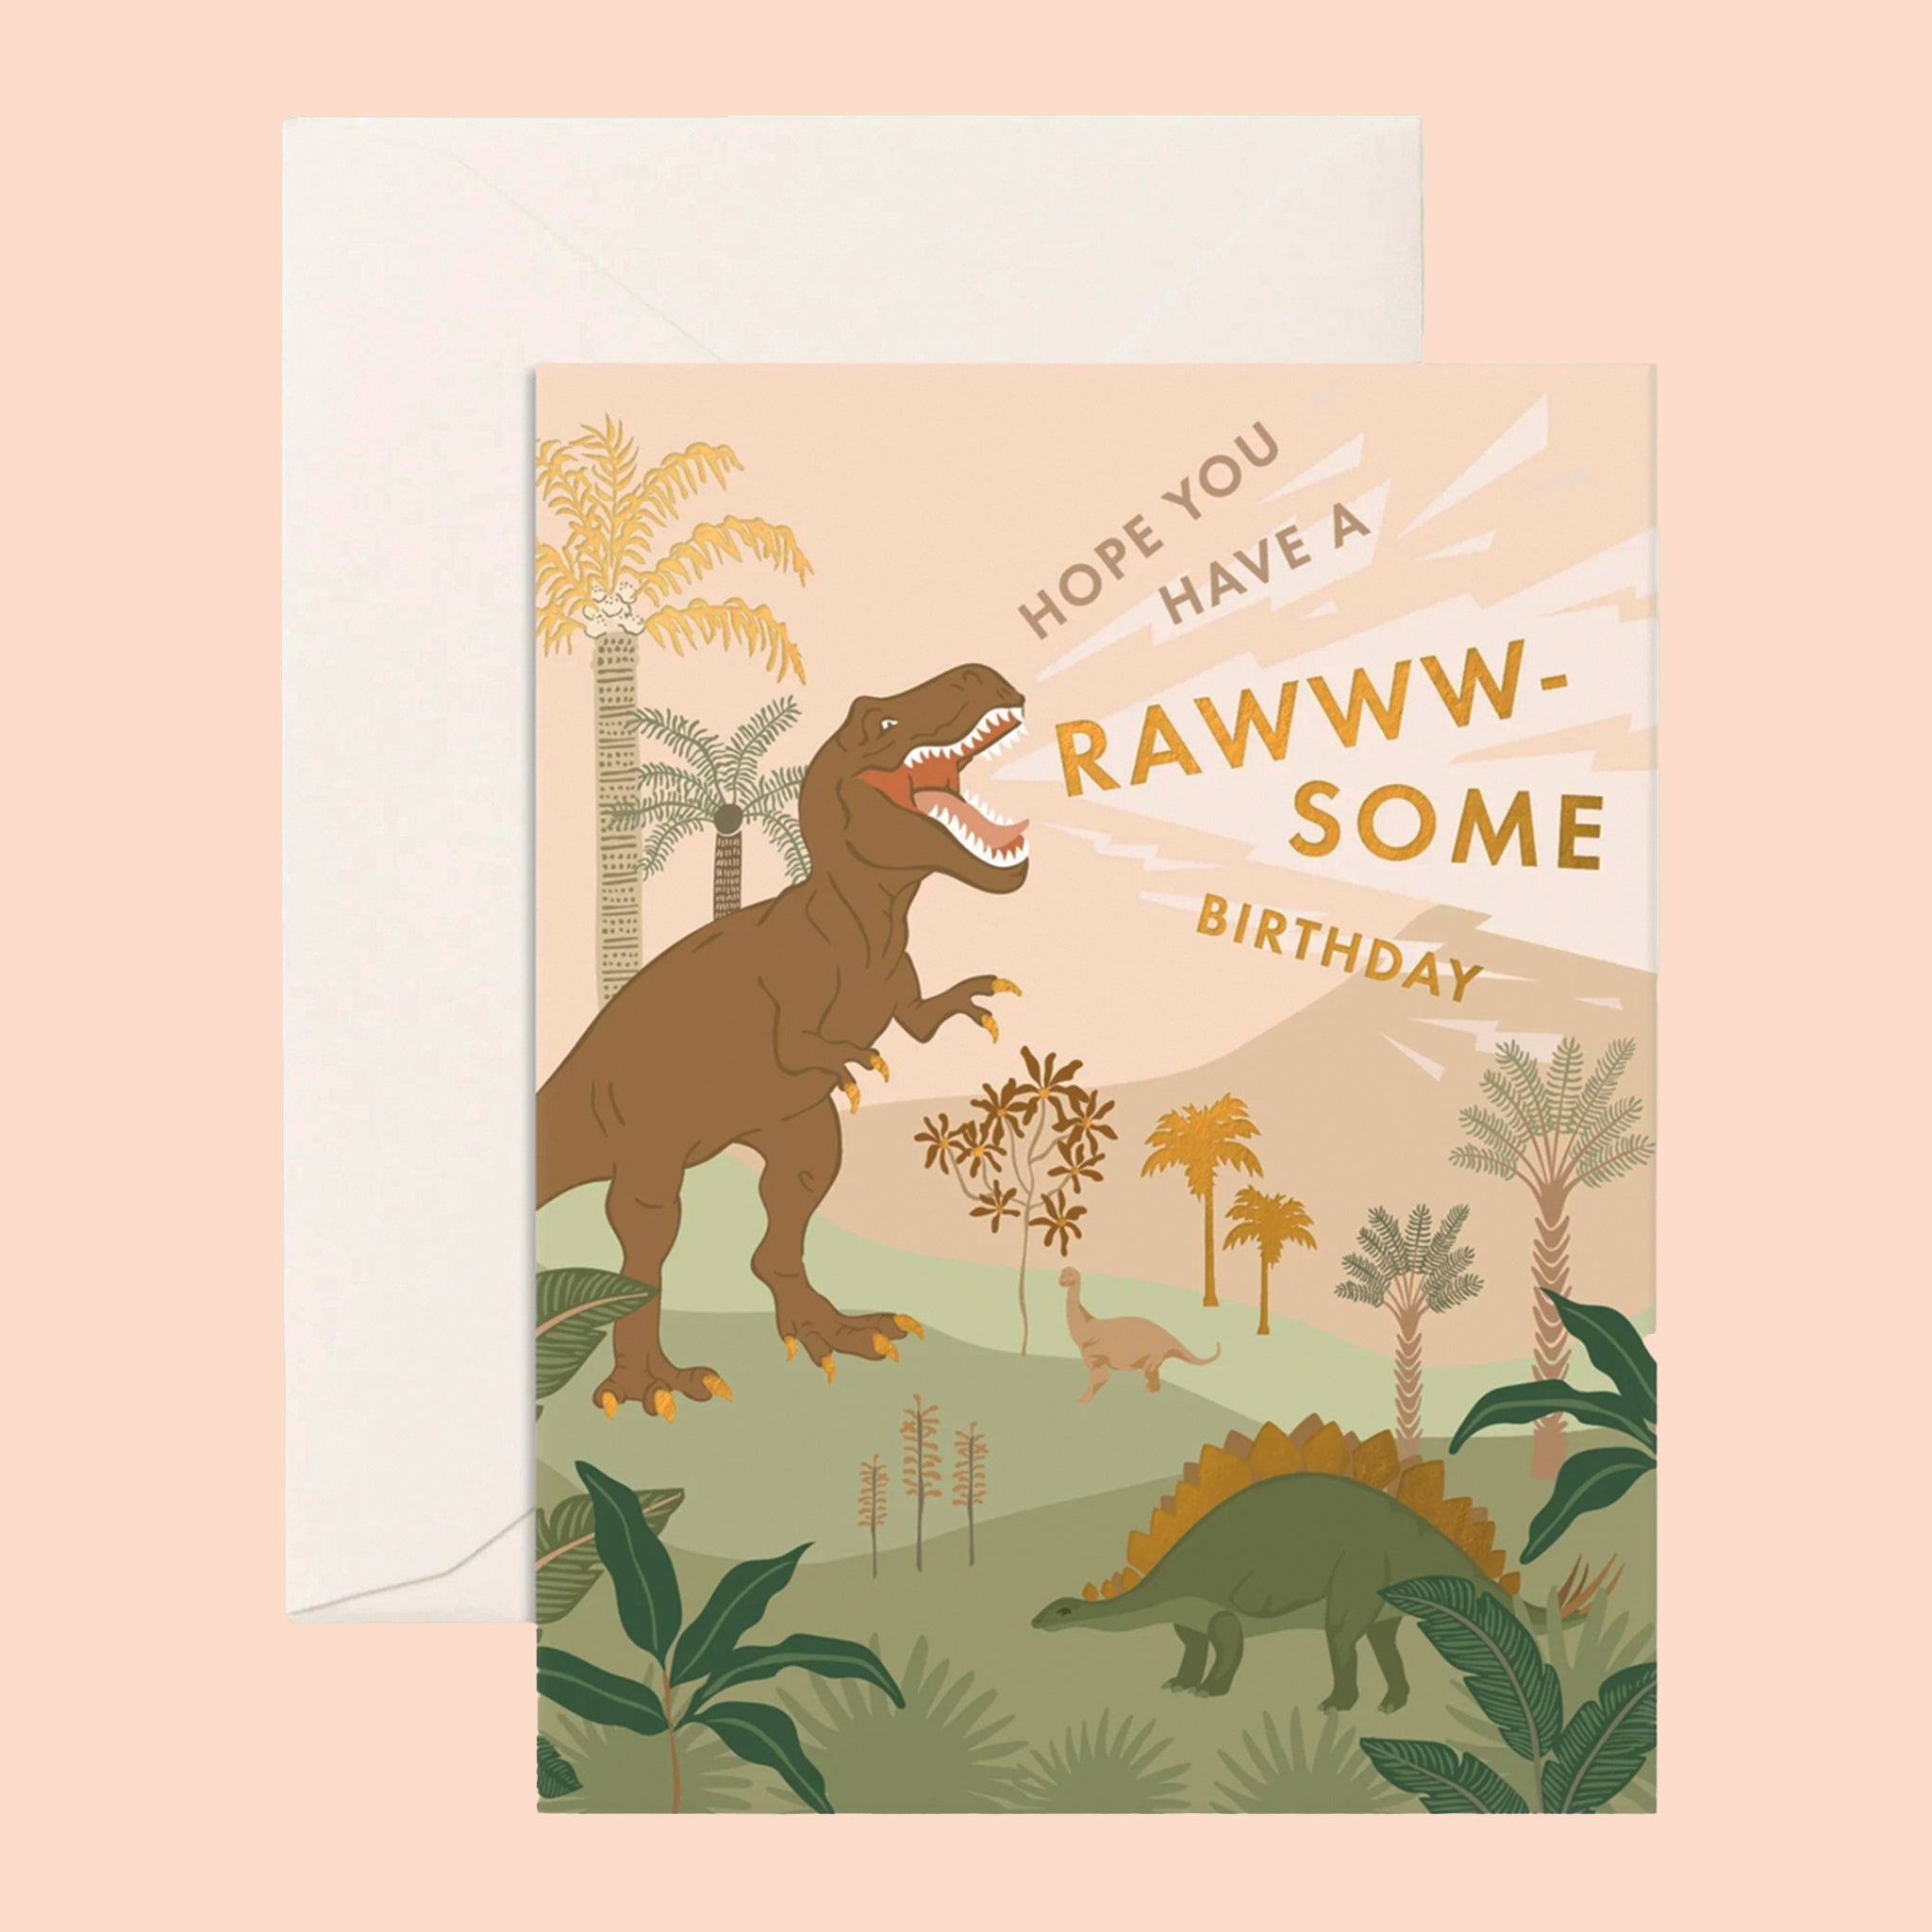 On a peachy background is a birthday card with a graphic of dinosaurs in a tropical landscape with gold foiled text that reads, "Hope You Have A Rawww-Some Birthday".